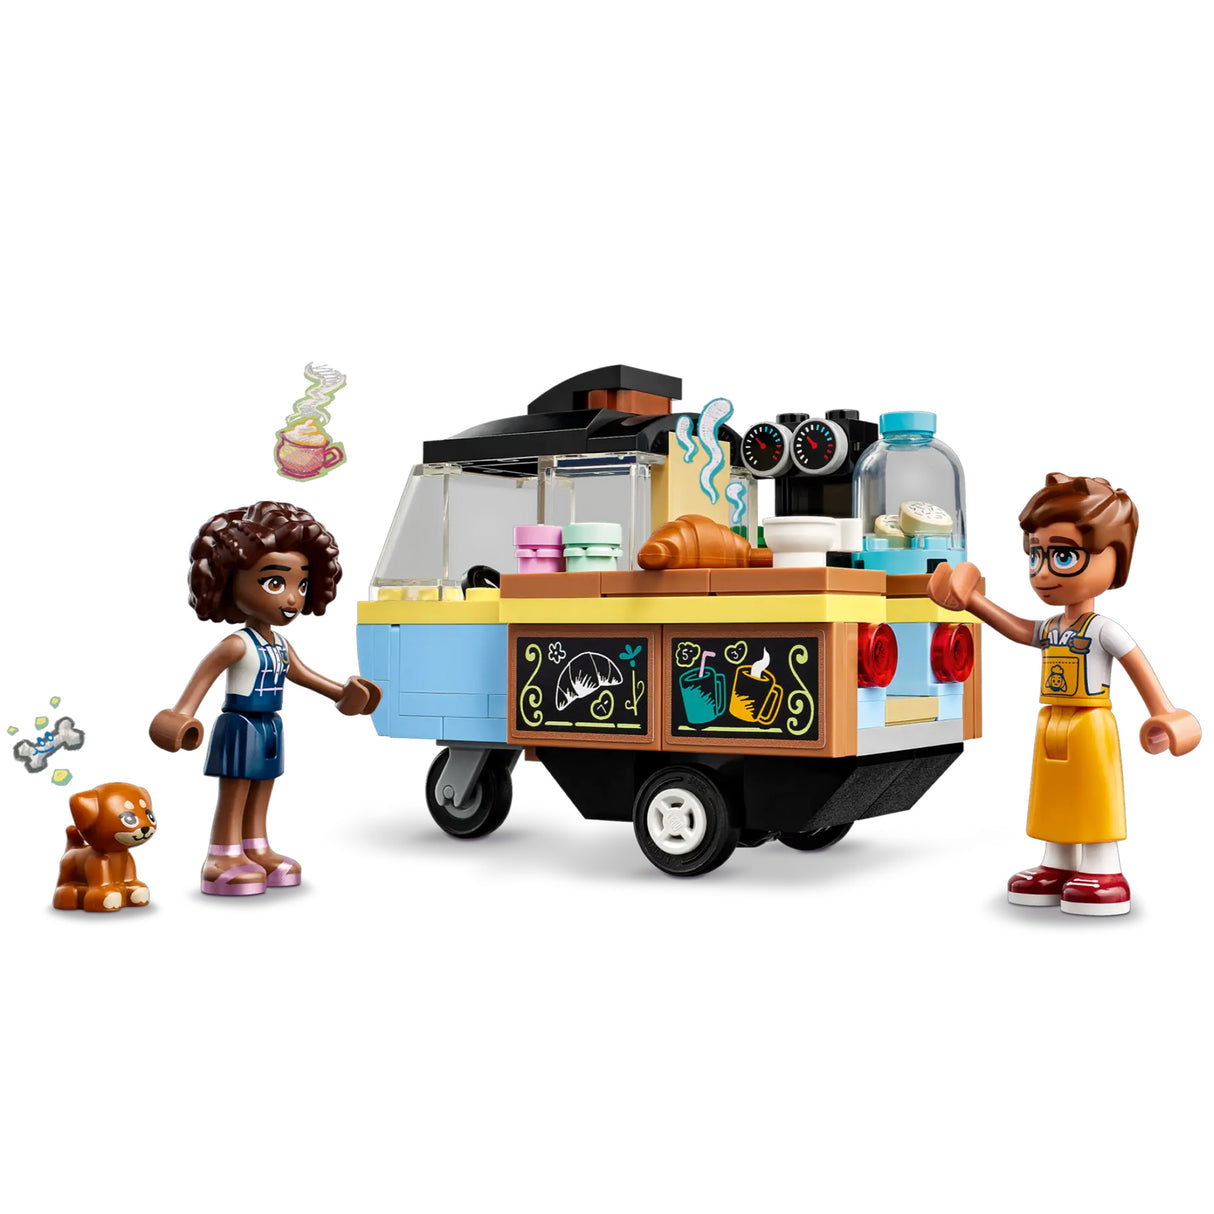 LEGO Friends Mobile Bakery Food Cart 42606, (125-pieces)